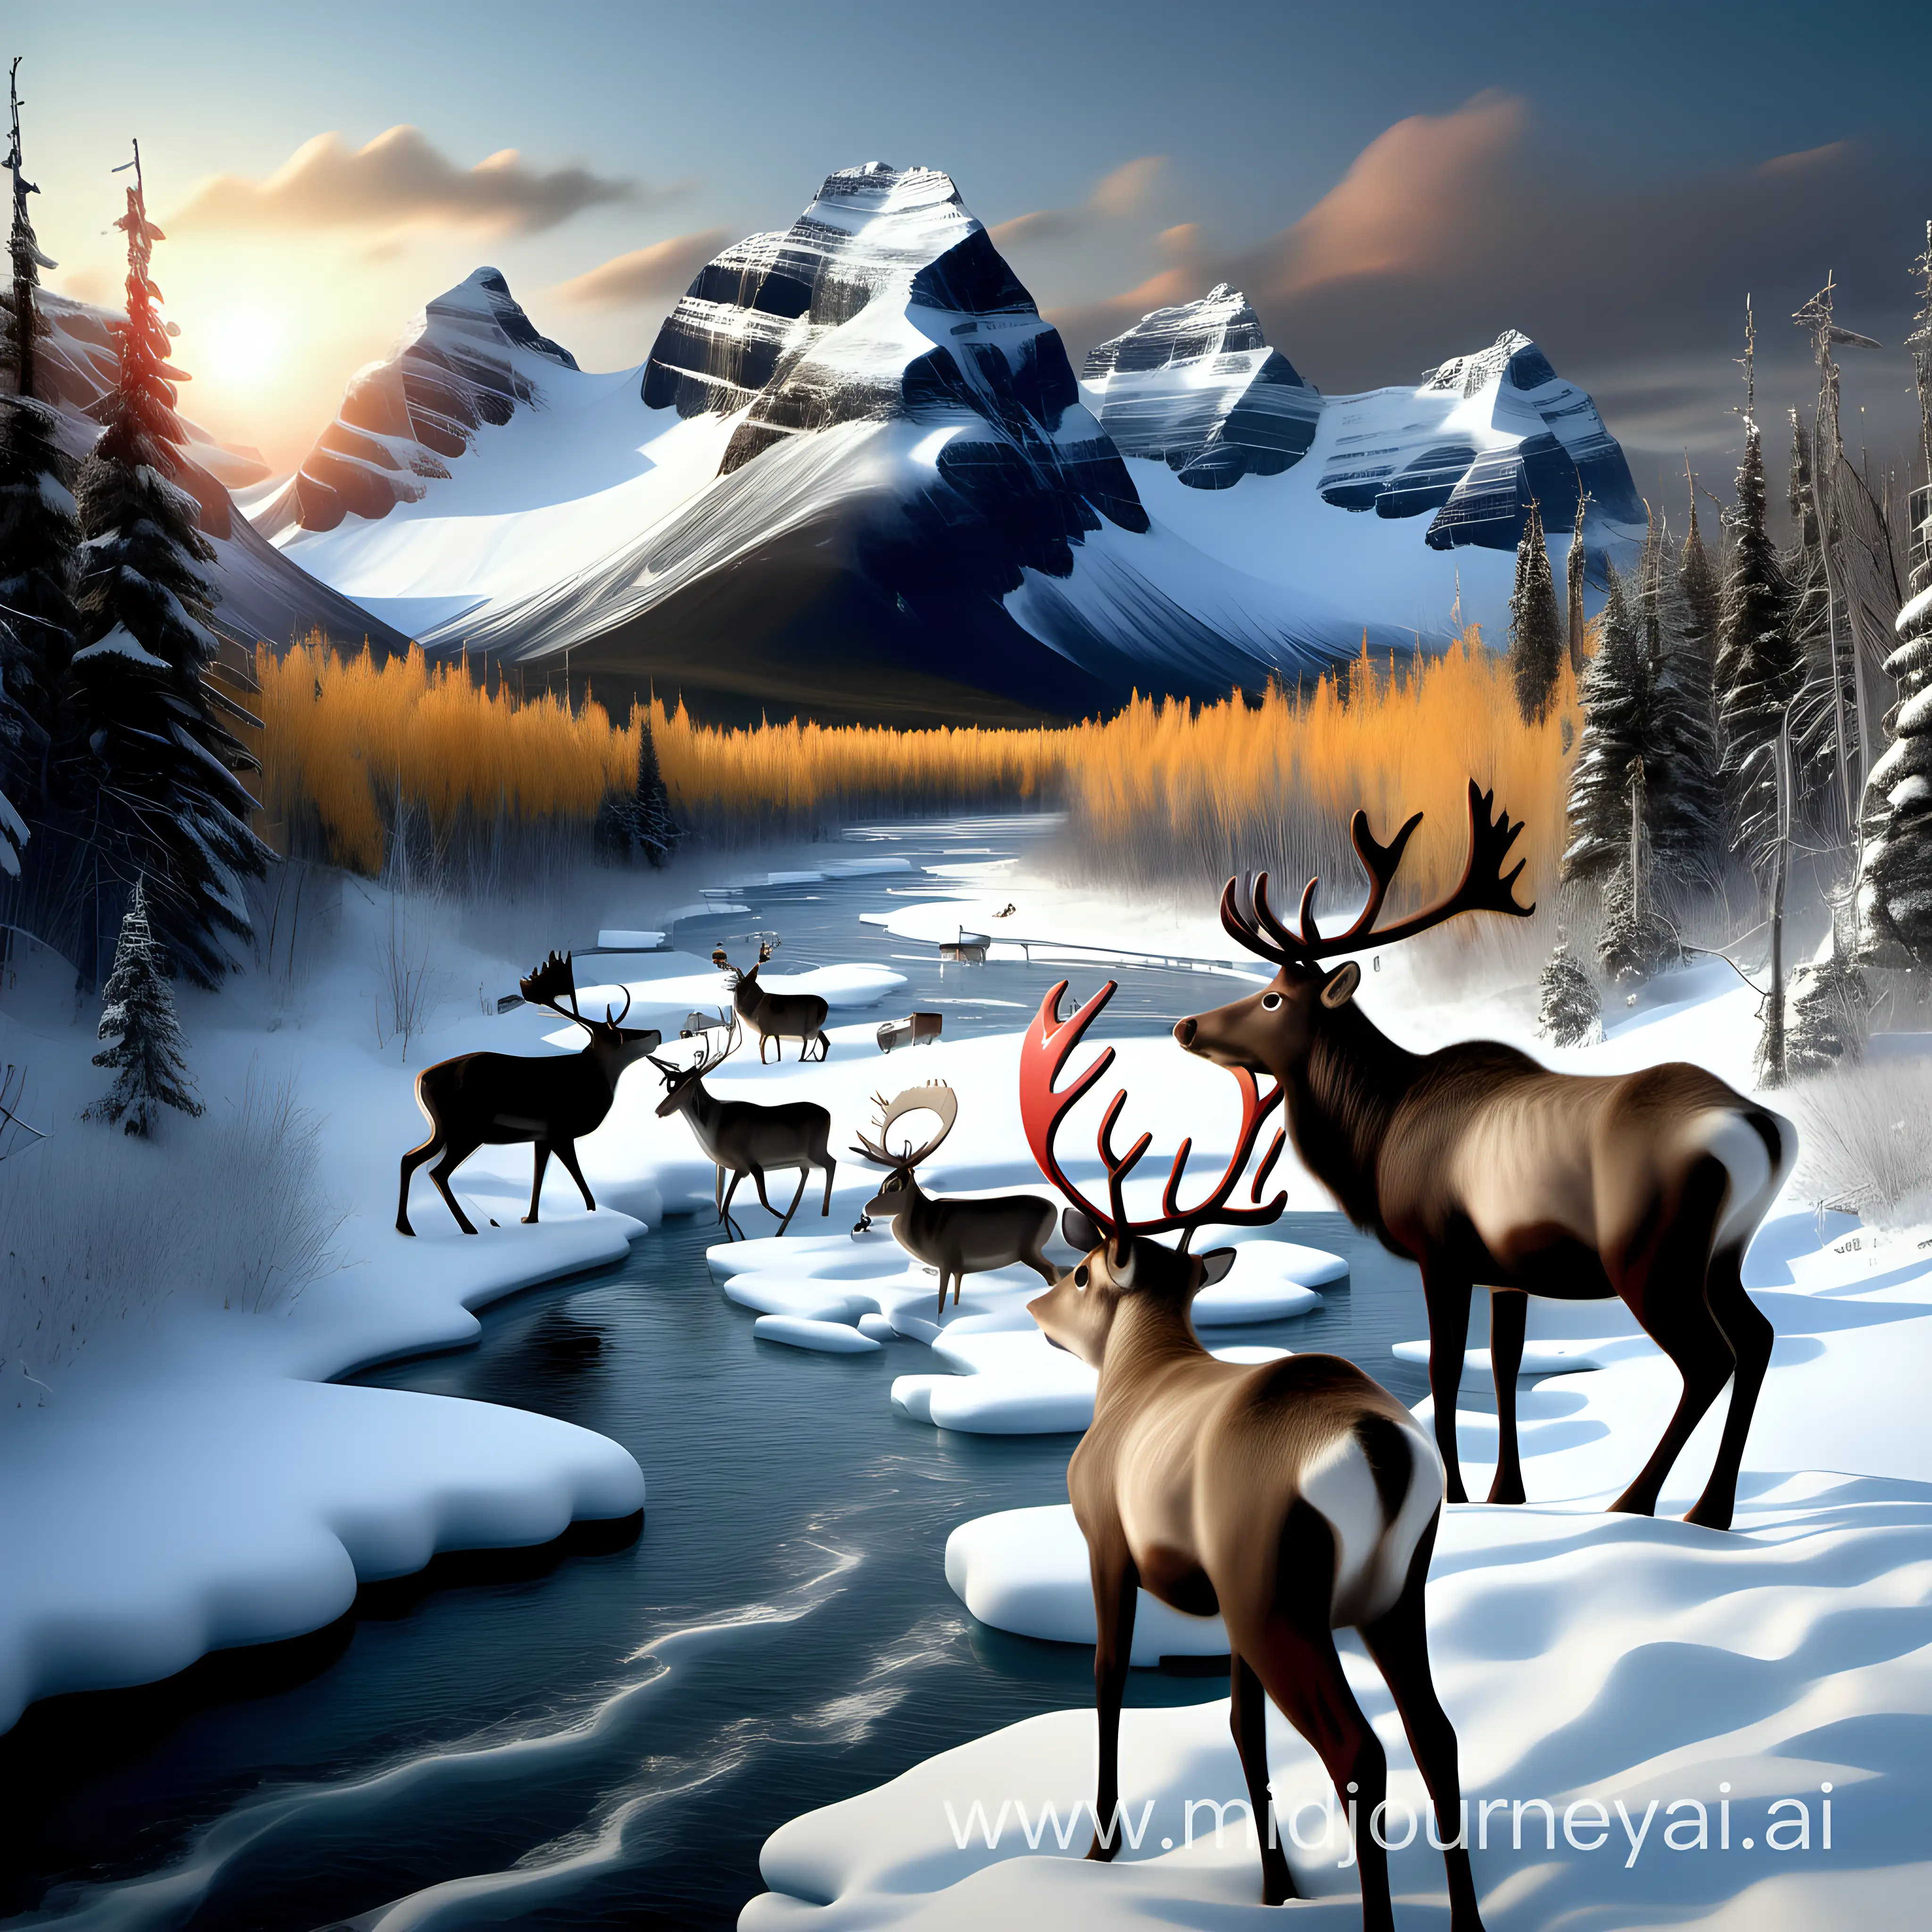 Craft a lifelike and mesmerizing photograph, reminiscent of a scene captured by a Canon Mark 3D camera. Immerse the viewer in the breathtaking beauty of northern Canada with snow-covered mountains, gracefully adorned reindeers, and a meandering river embraced by a pristine snowy landscape. Leverage the capabilities of the Canon Mark 3D to ensure the image reflects intricate details, vivid colors, and a sense of realism. Let the soft sunlight in the background cast a warm, enchanting glow, enhancing the overall photographic experience. Design the image  aiming to transport individuals to the heart of the serene northern wilderness.